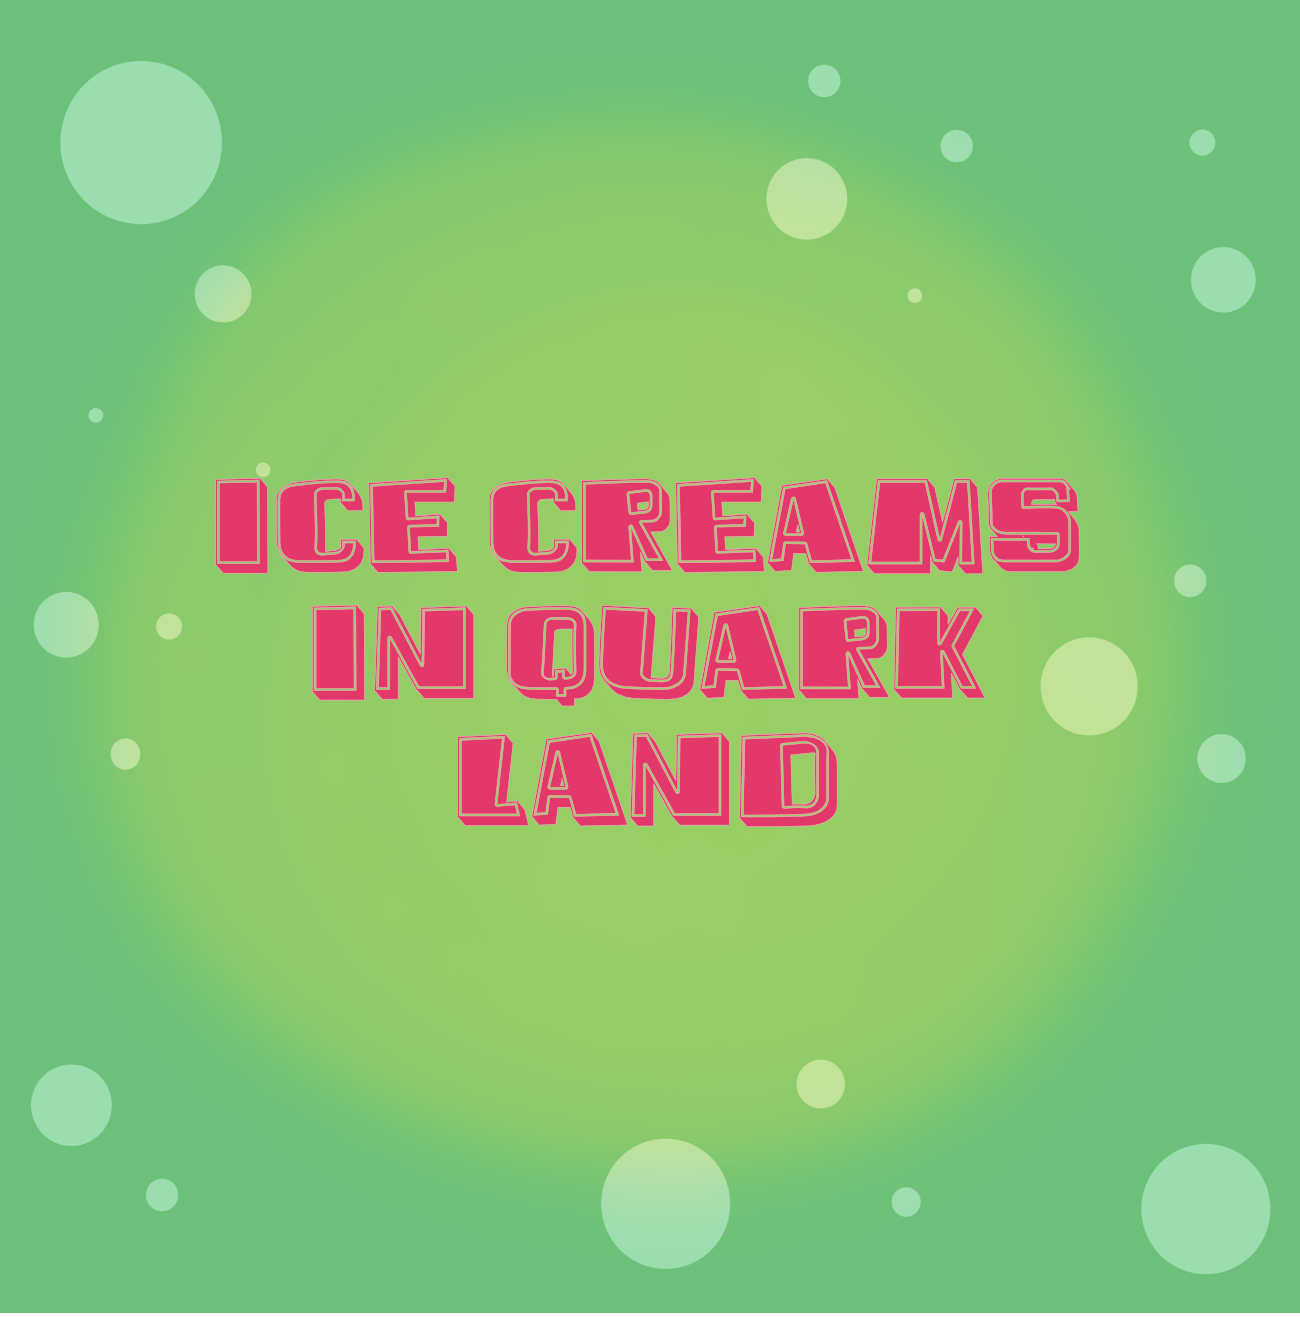 Bedtime Stories Ice Creams in Quark Land by Miro Maitre short stories for kids free STEM books page 4